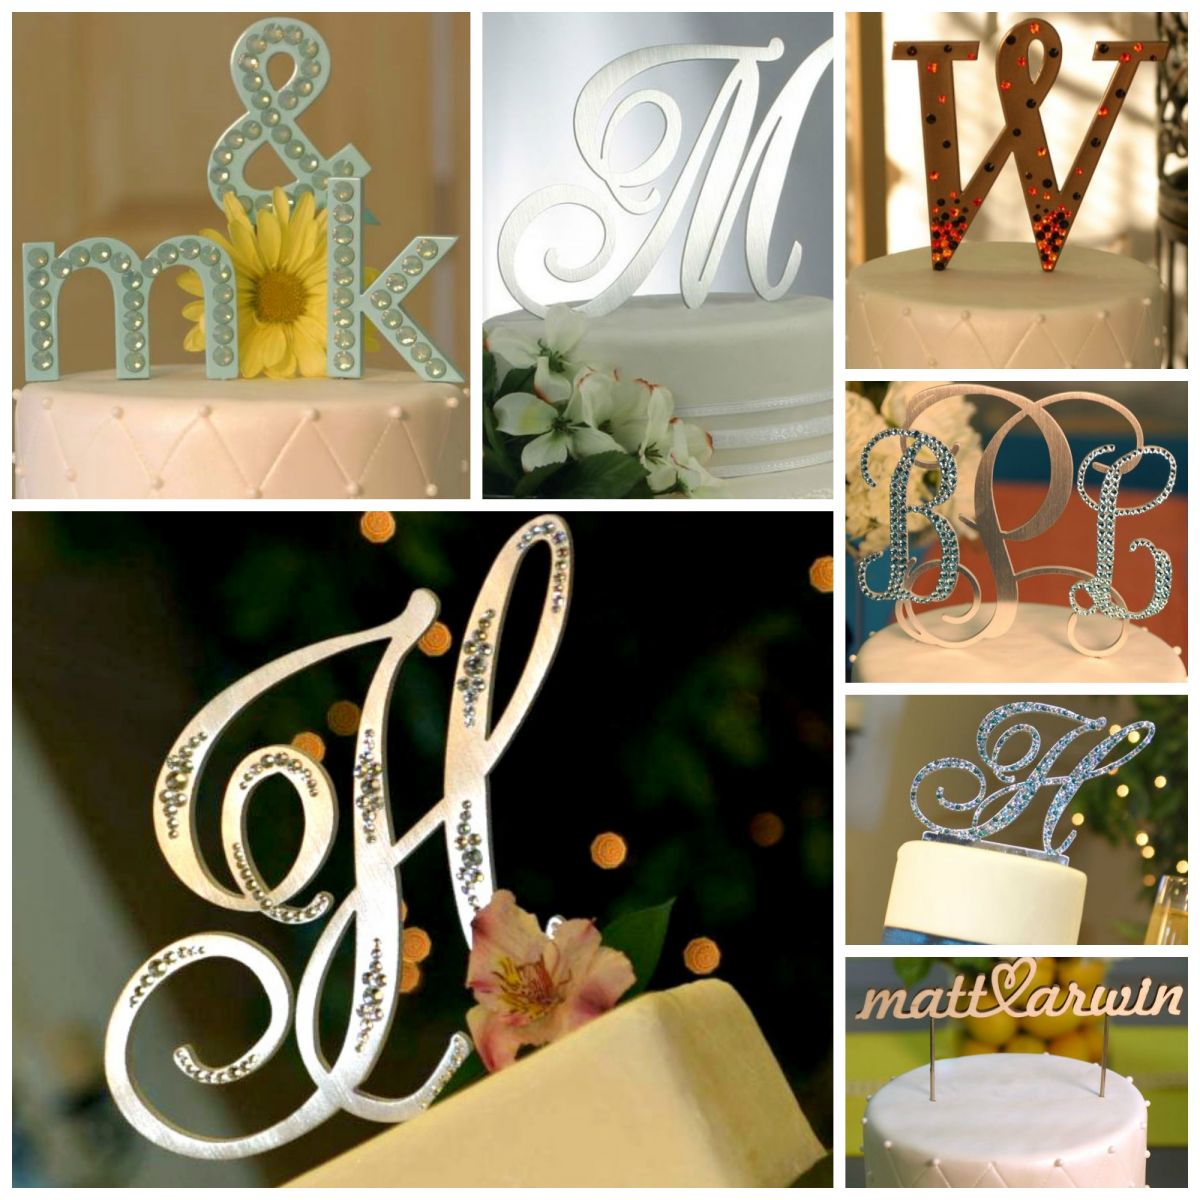 wedding cuts customized cake toppers provided by wedding cuts reviewed ...